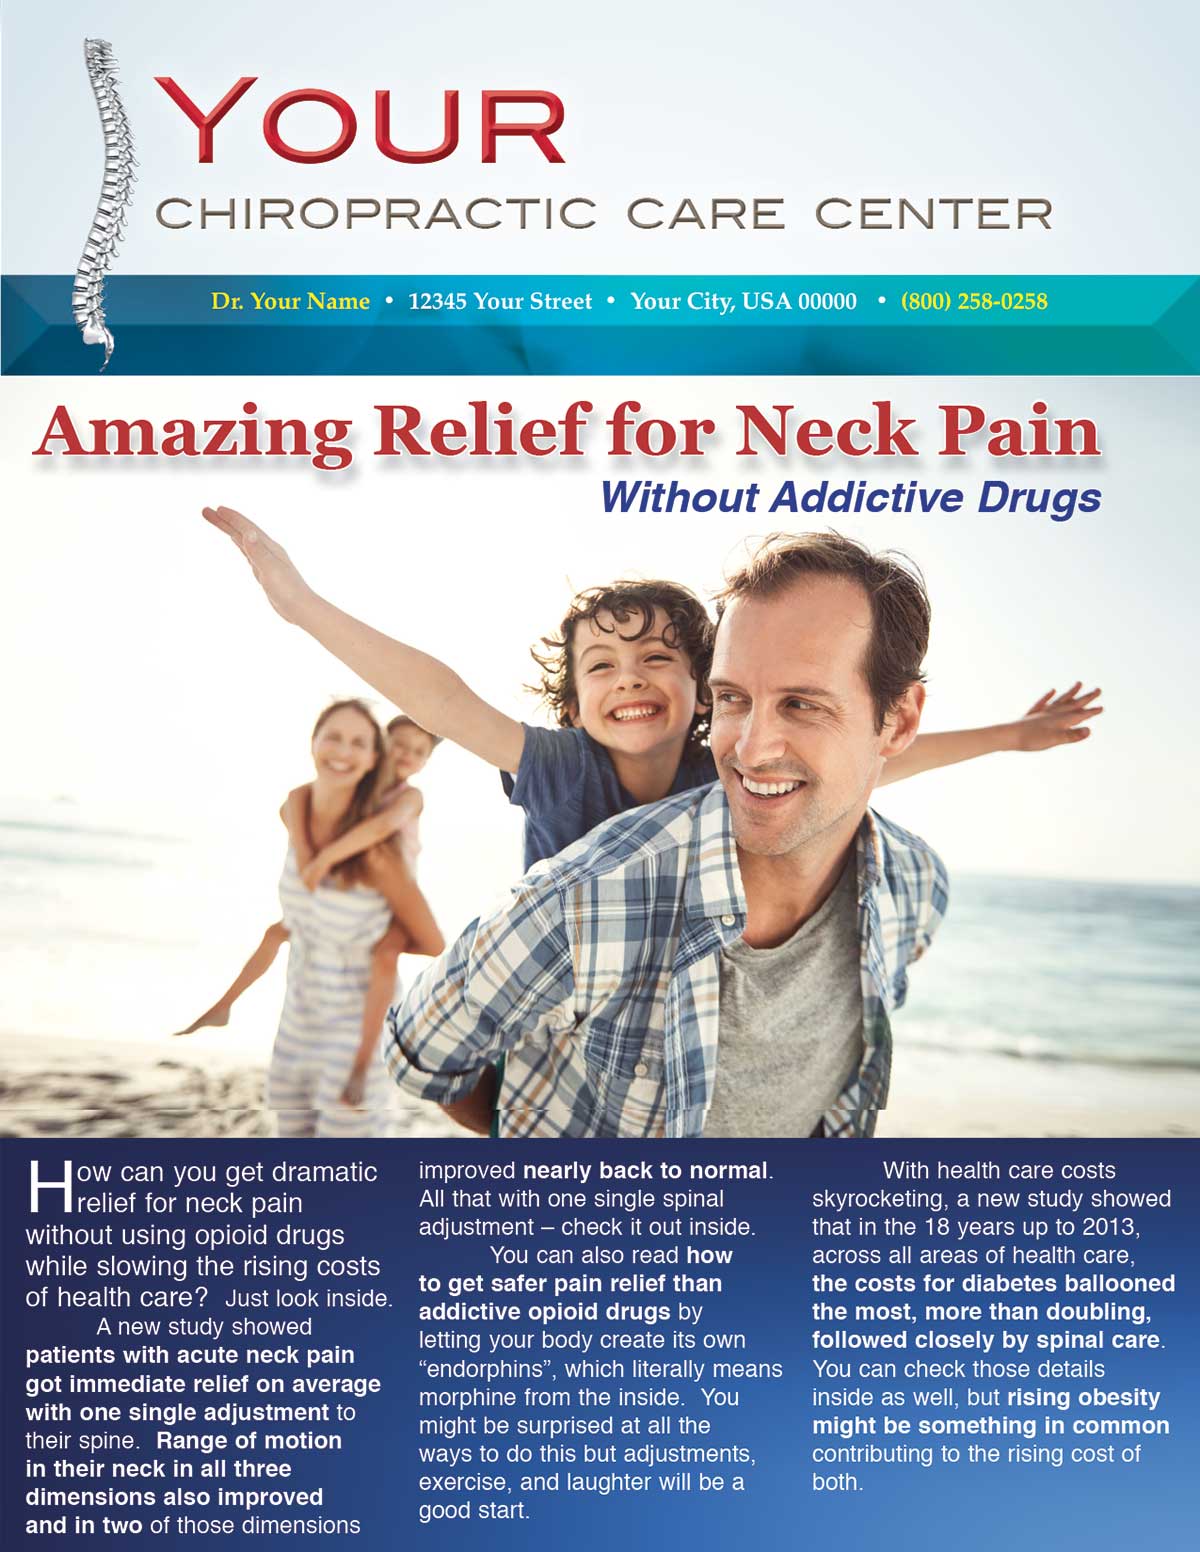 Amazing Relief for Neck Pain